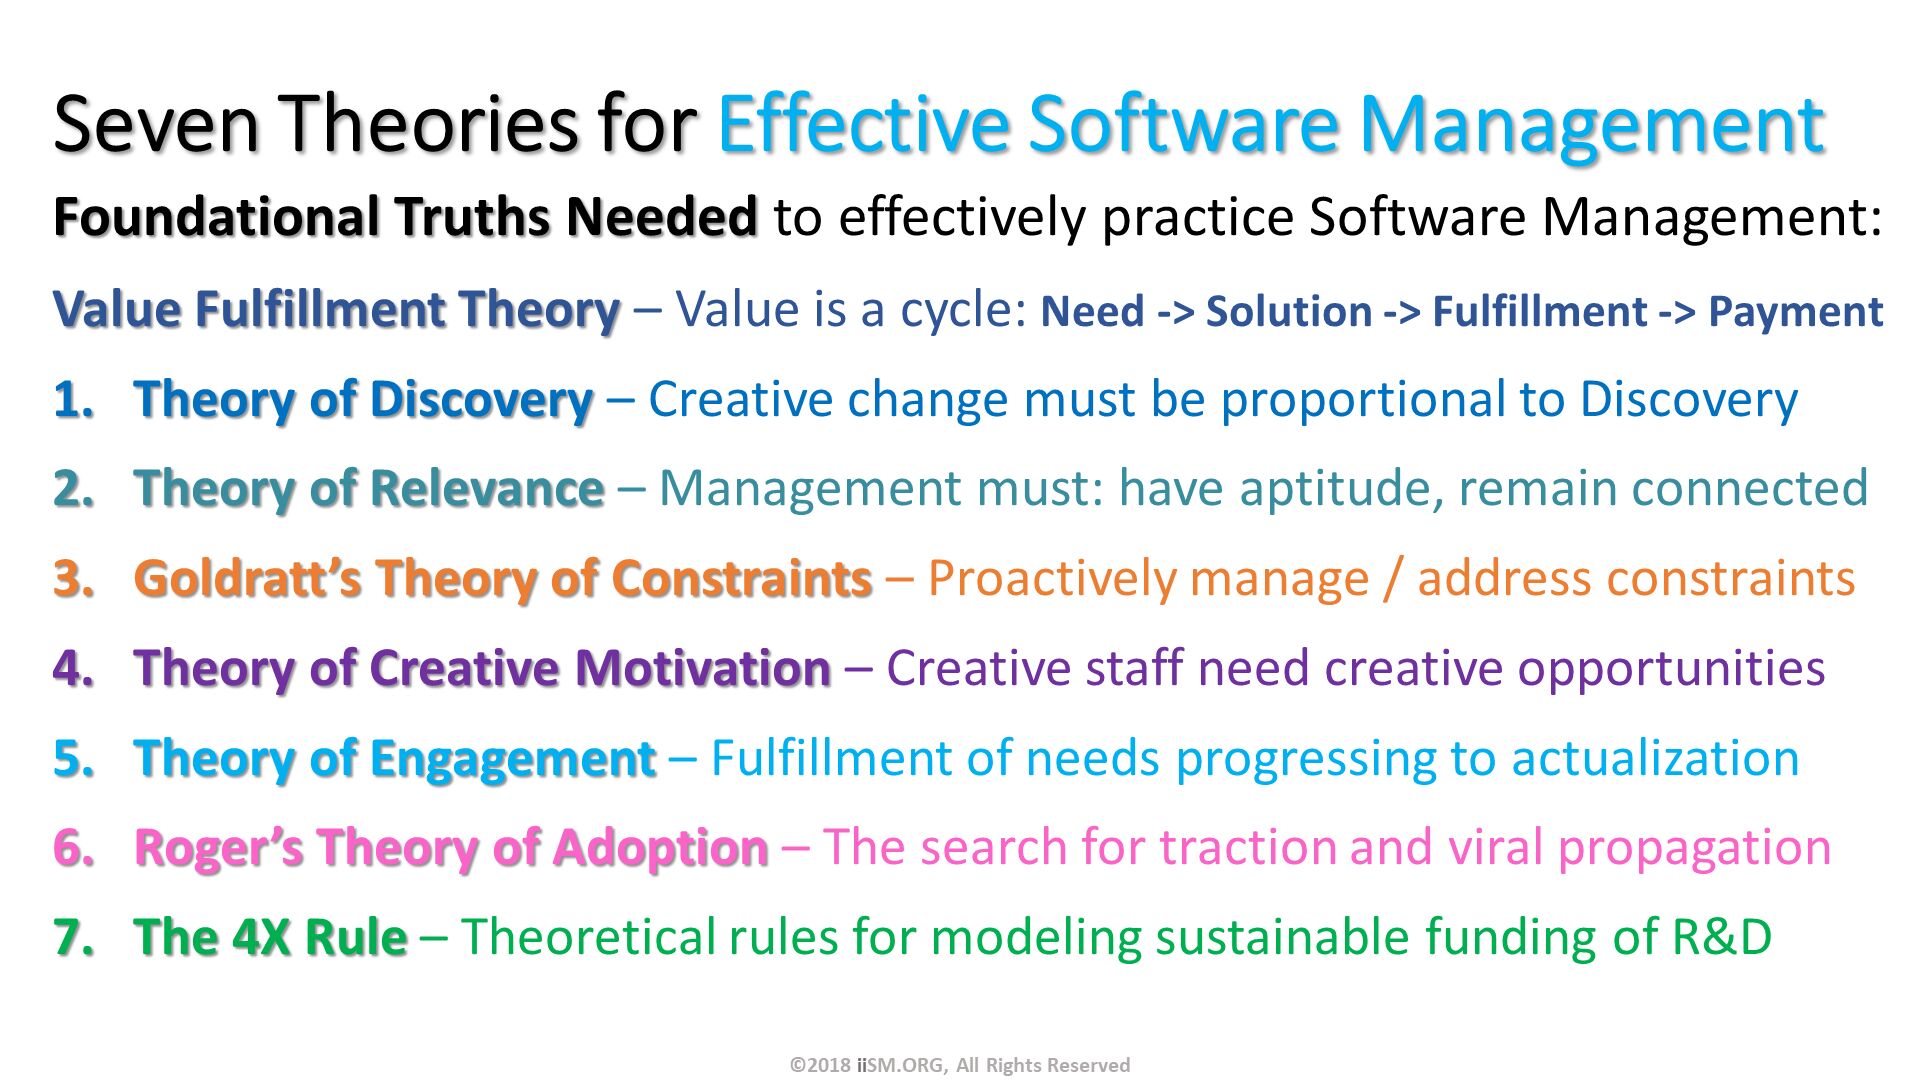 Seven Theories for Effective Software Management. Foundational Truths Needed to effectively practice Software Management:
Value Fulfillment Theory – Value is a cycle: Need -> Solution -> Fulfillment -> Payment
Theory of Discovery – Creative change must be proportional to Discovery
Theory of Relevance – Management must: have aptitude, remain connected
Goldratt’s Theory of Constraints – Proactively manage / address constraints
Theory of Creative Motivation – Creative staff need creative opportunities
Theory of Engagement – Fulfillment of needs progressing to actualization
Roger’s Theory of Adoption – The search for traction and viral propagation 
The 4X Rule – Theoretical rules for modeling sustainable funding of R&D. ©2018 iiSM.ORG, All Rights Reserved. 